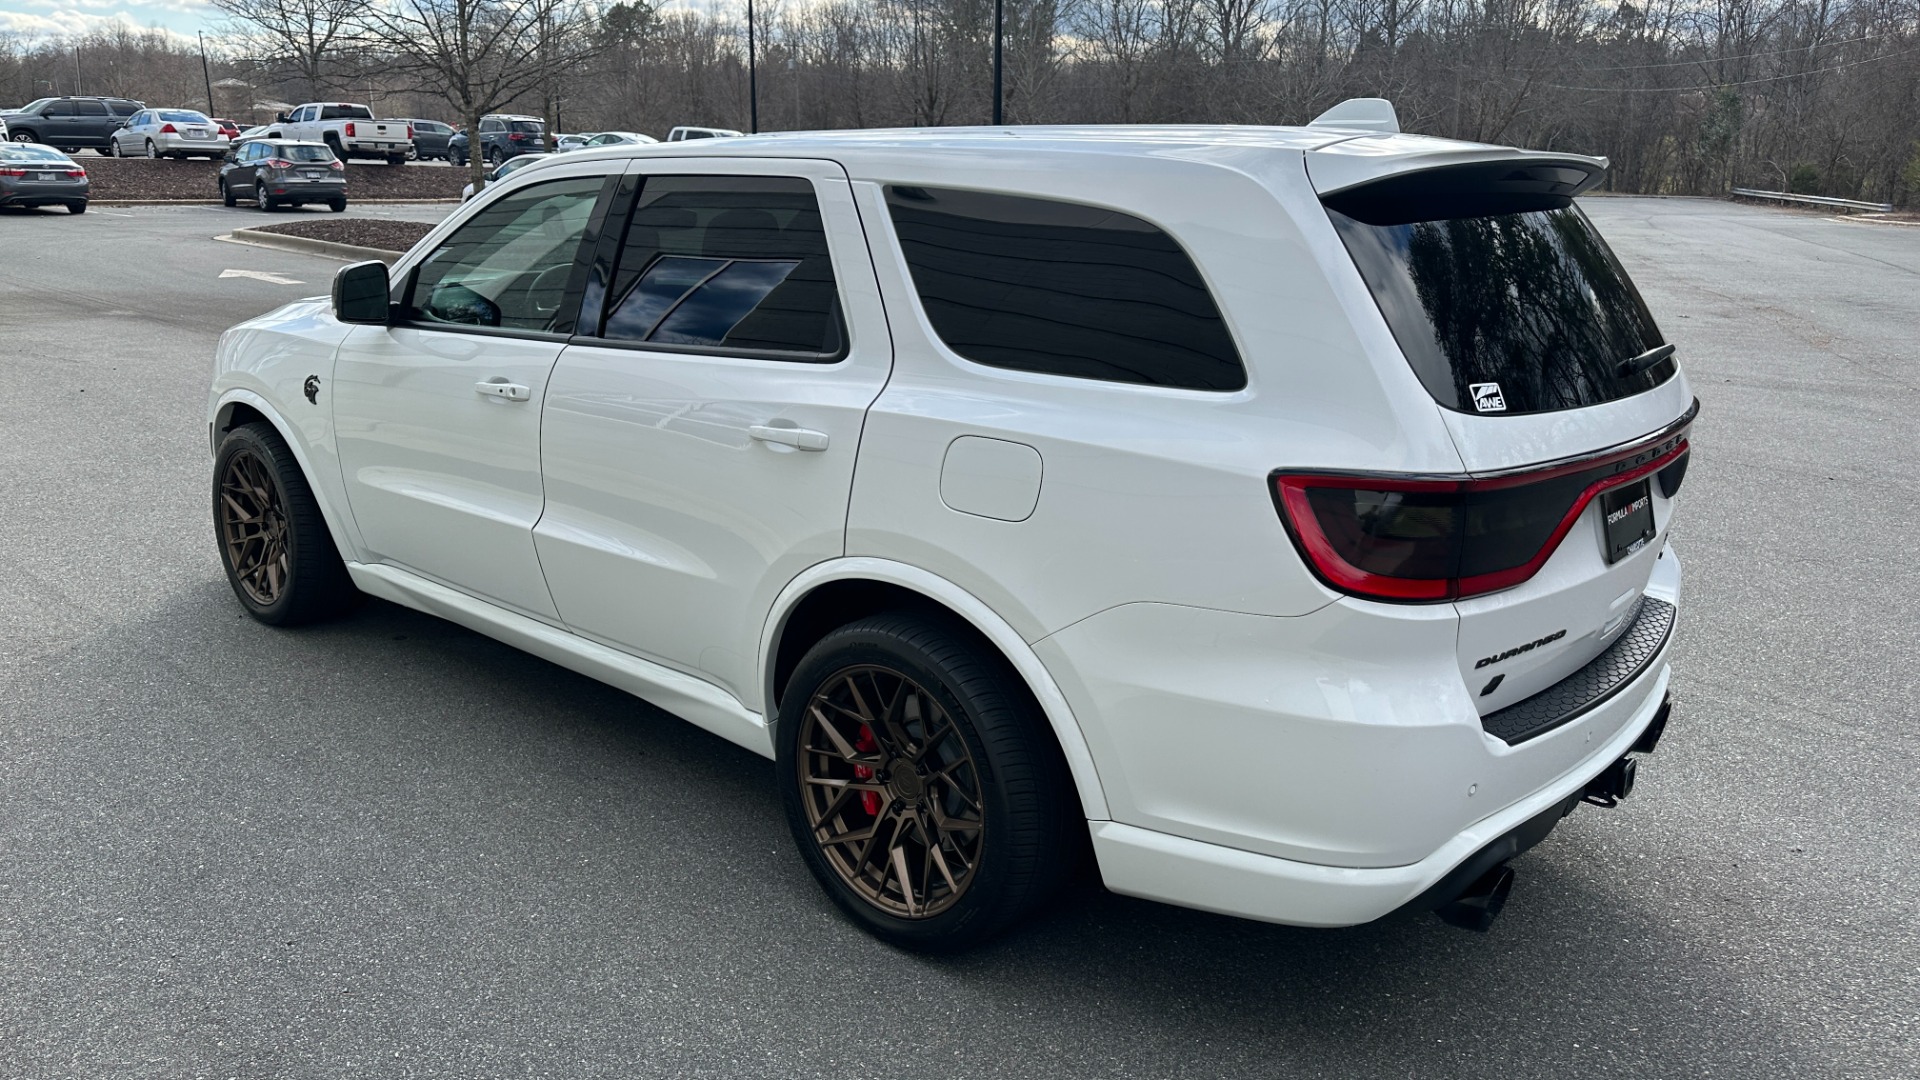 Used 2021 Dodge Durango SRT HELLCAT / LEGMAKER INTAKE / VARIANT WHEELS / EXHAUST for sale $74,950 at Formula Imports in Charlotte NC 28227 7